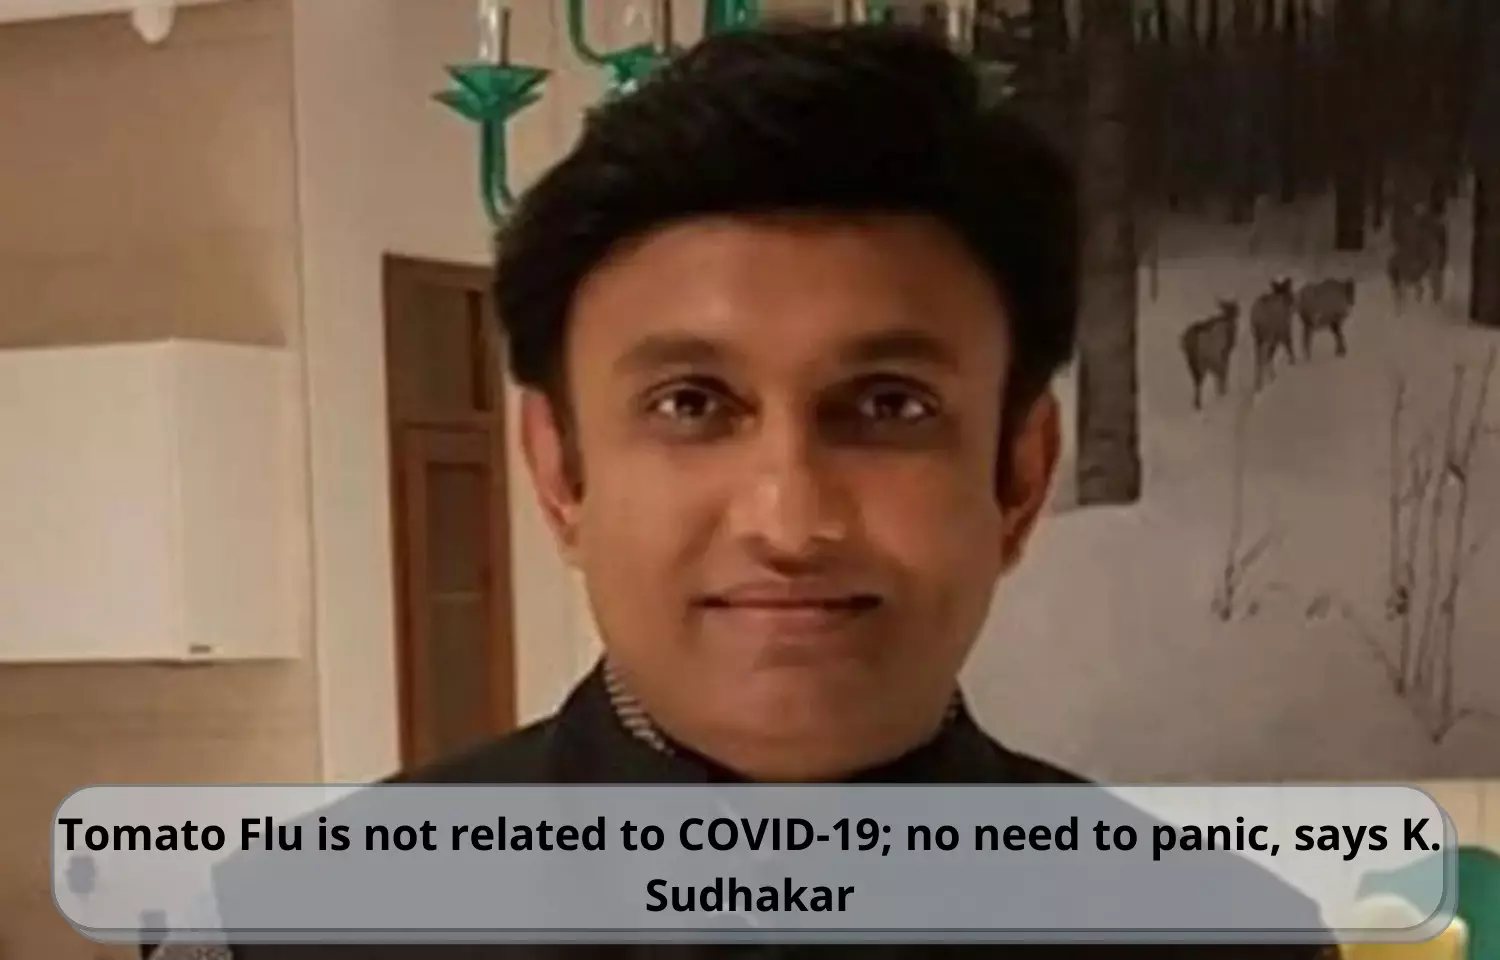 Tomato Flu is not related to COVID-19, no need to panic: K Sudhakar